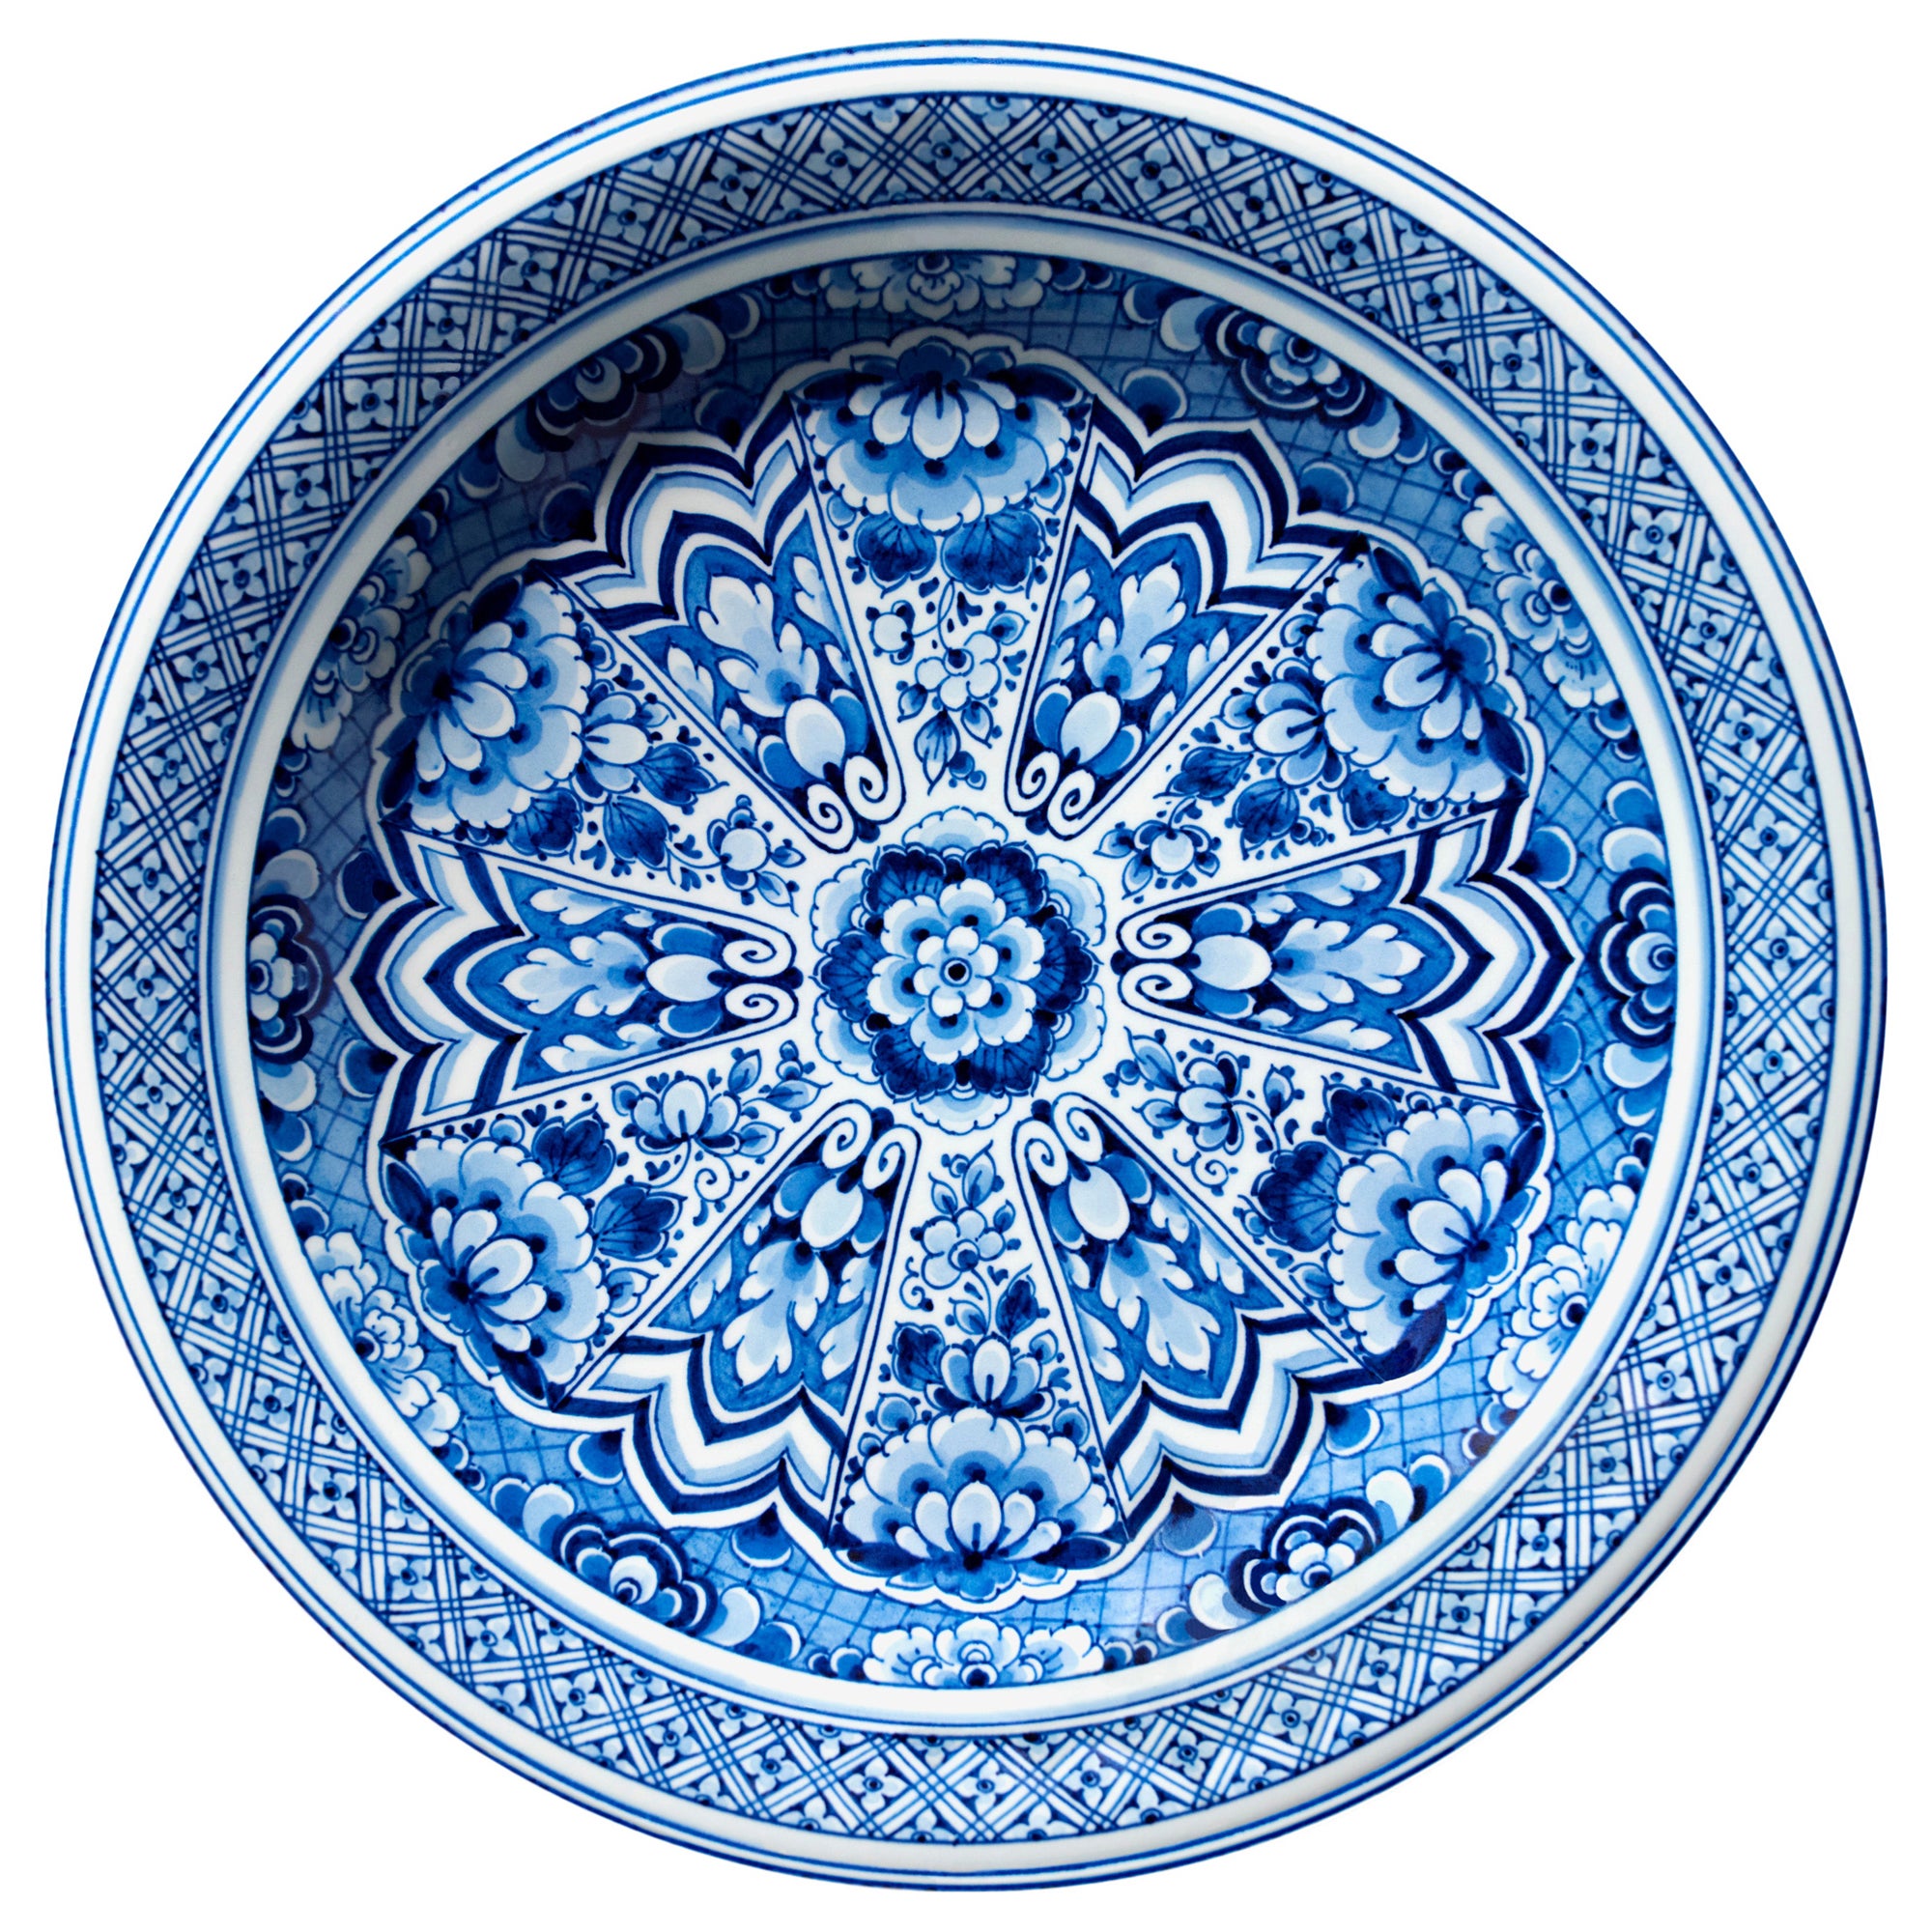 Arriba Perseo Lubricar Delft Blue Plates - 47 For Sale on 1stDibs | hand painted delfts blue, delft  dinnerware, delft blue charger plates